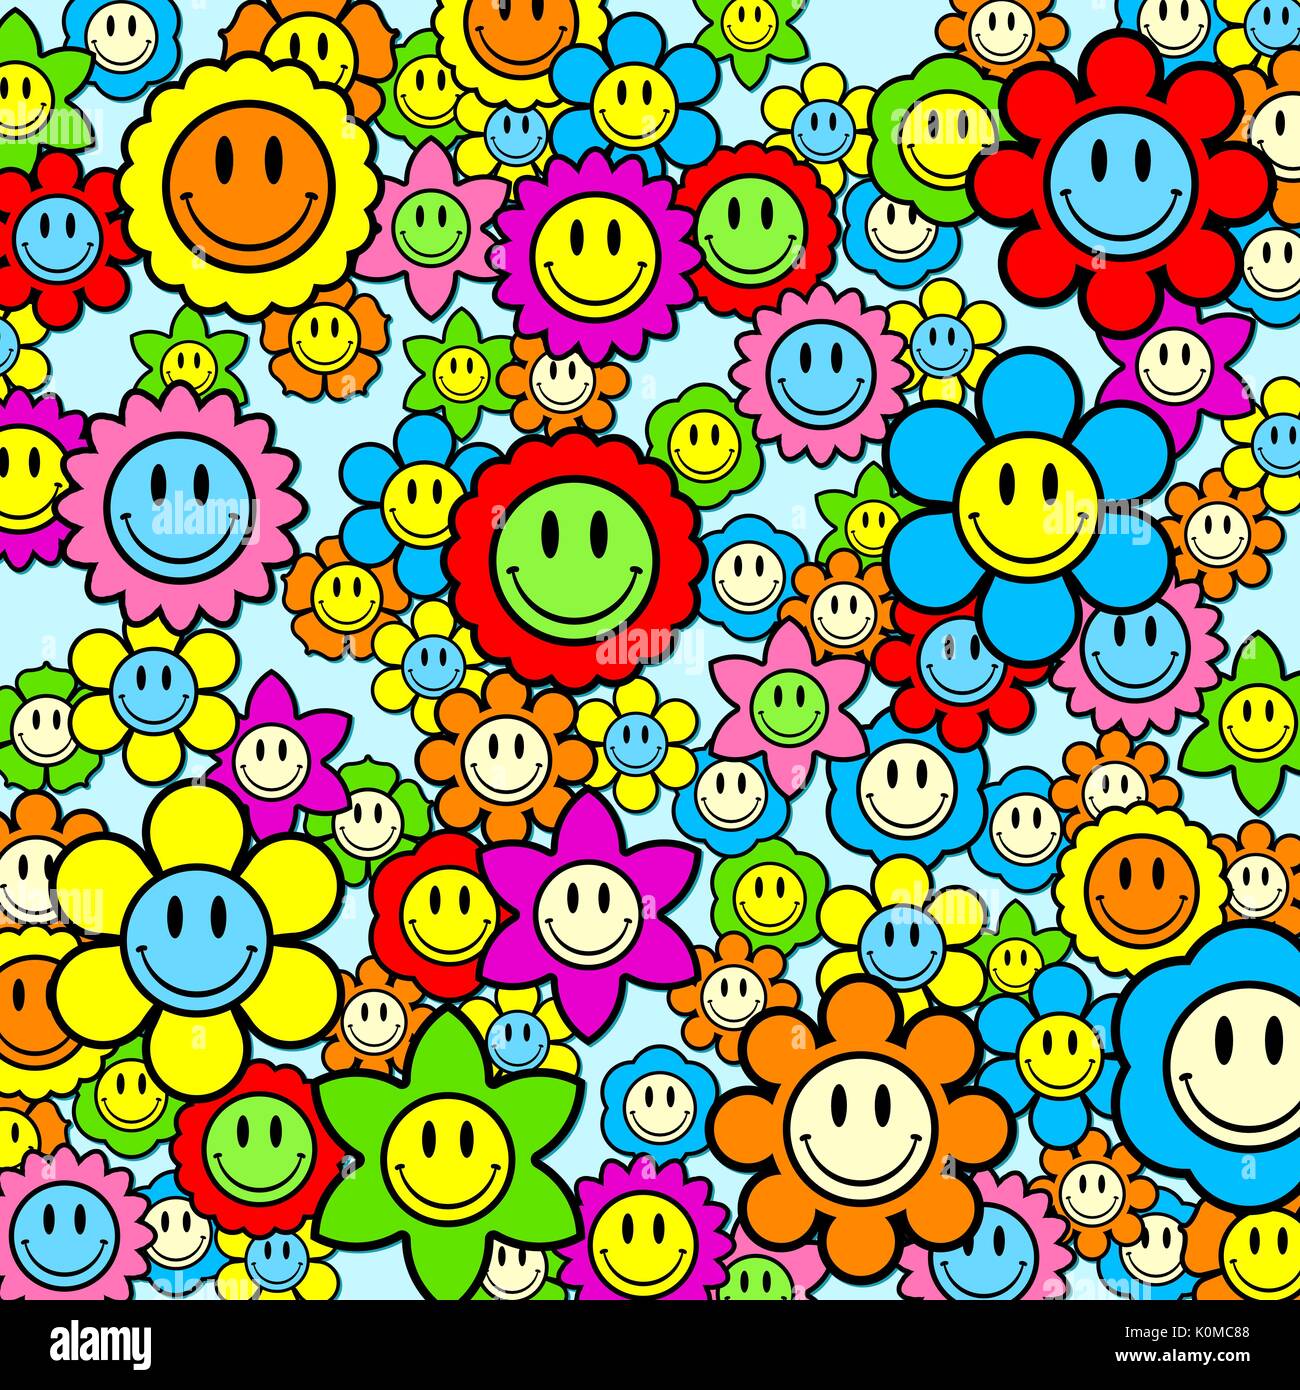 Colorful smiley face flower background illustration Stock Vector